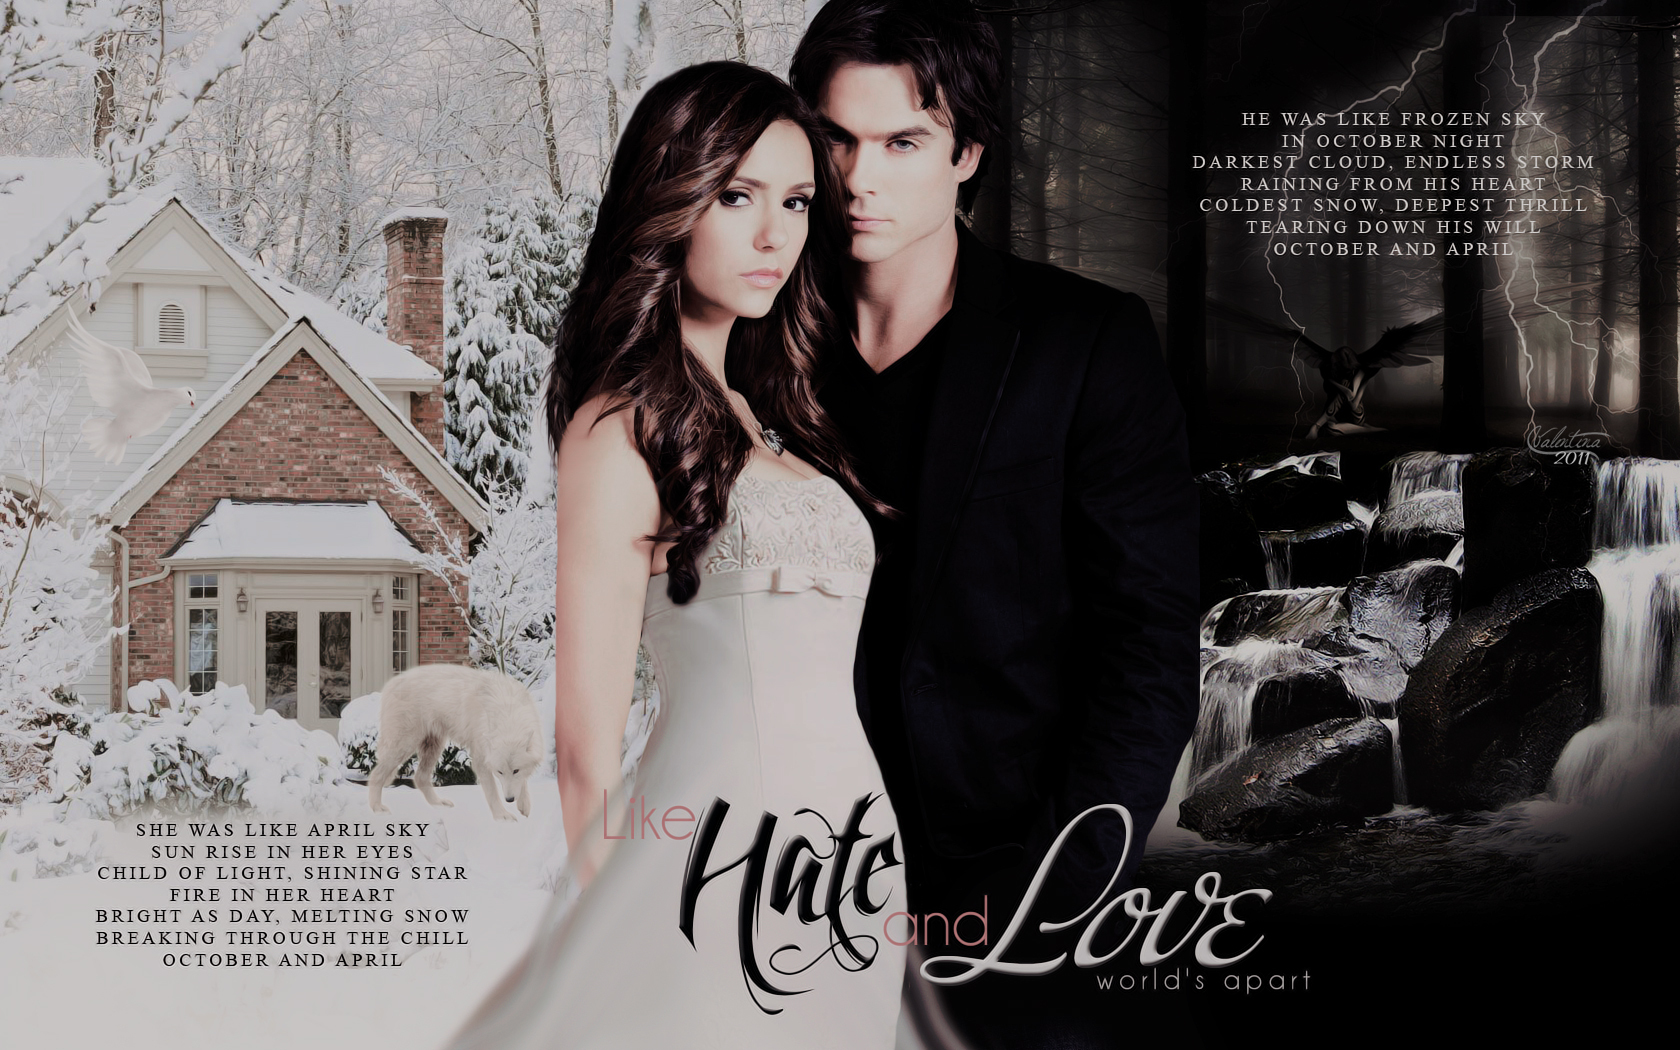 63 Images About Vampire *-* On We Heart It - Vampire Diaries Hd , HD Wallpaper & Backgrounds